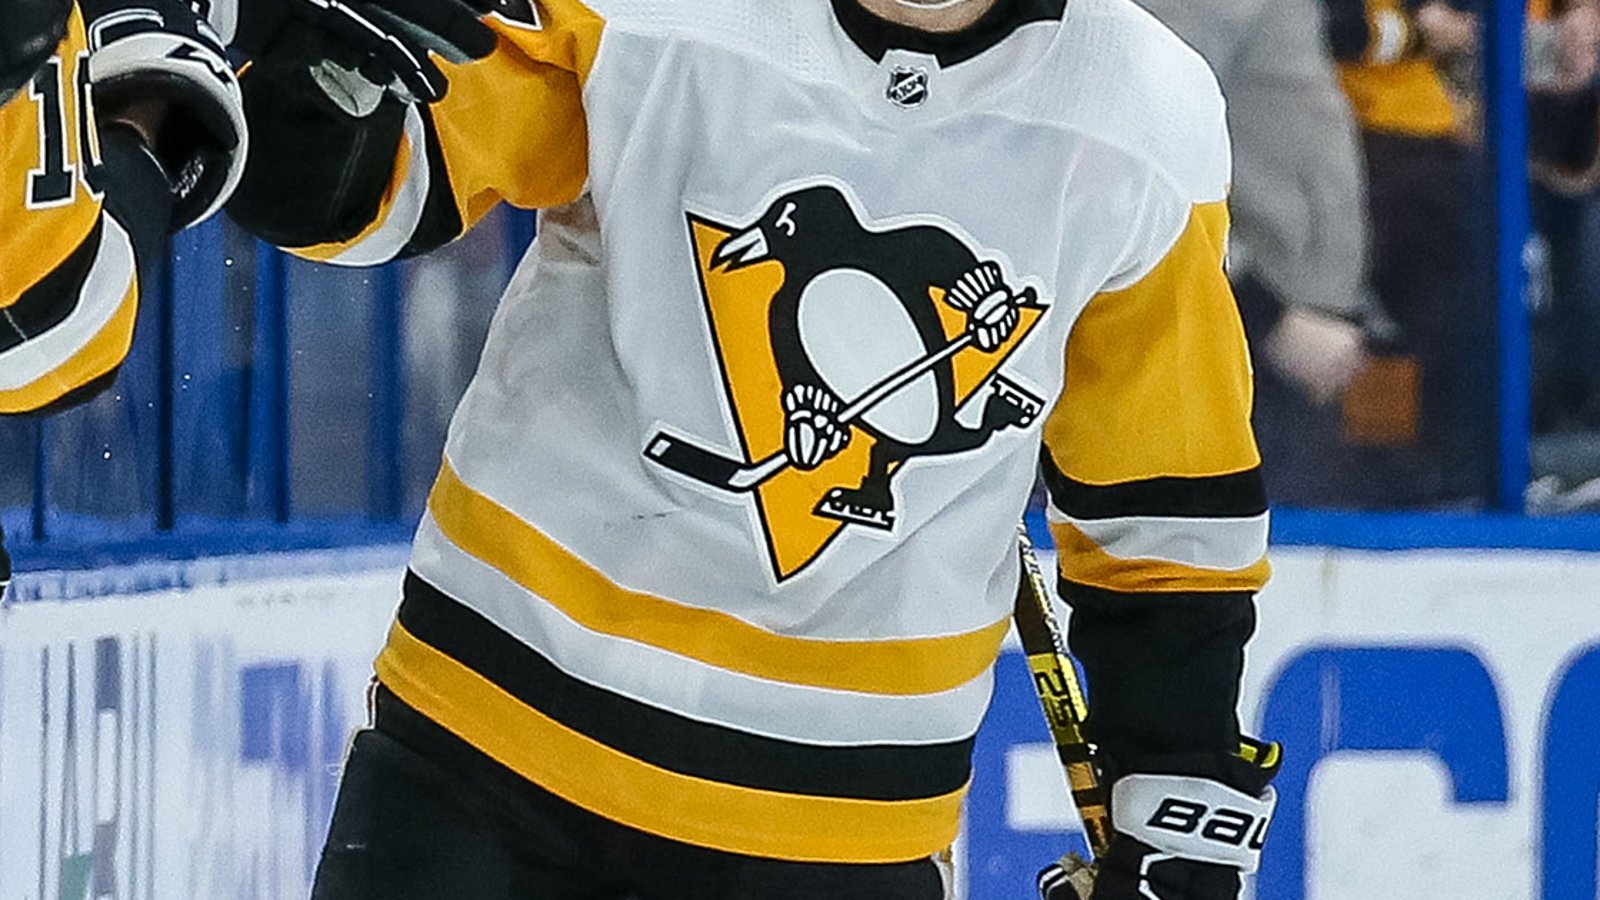  Breaking: Penguins pick up another defenseman in last minute move